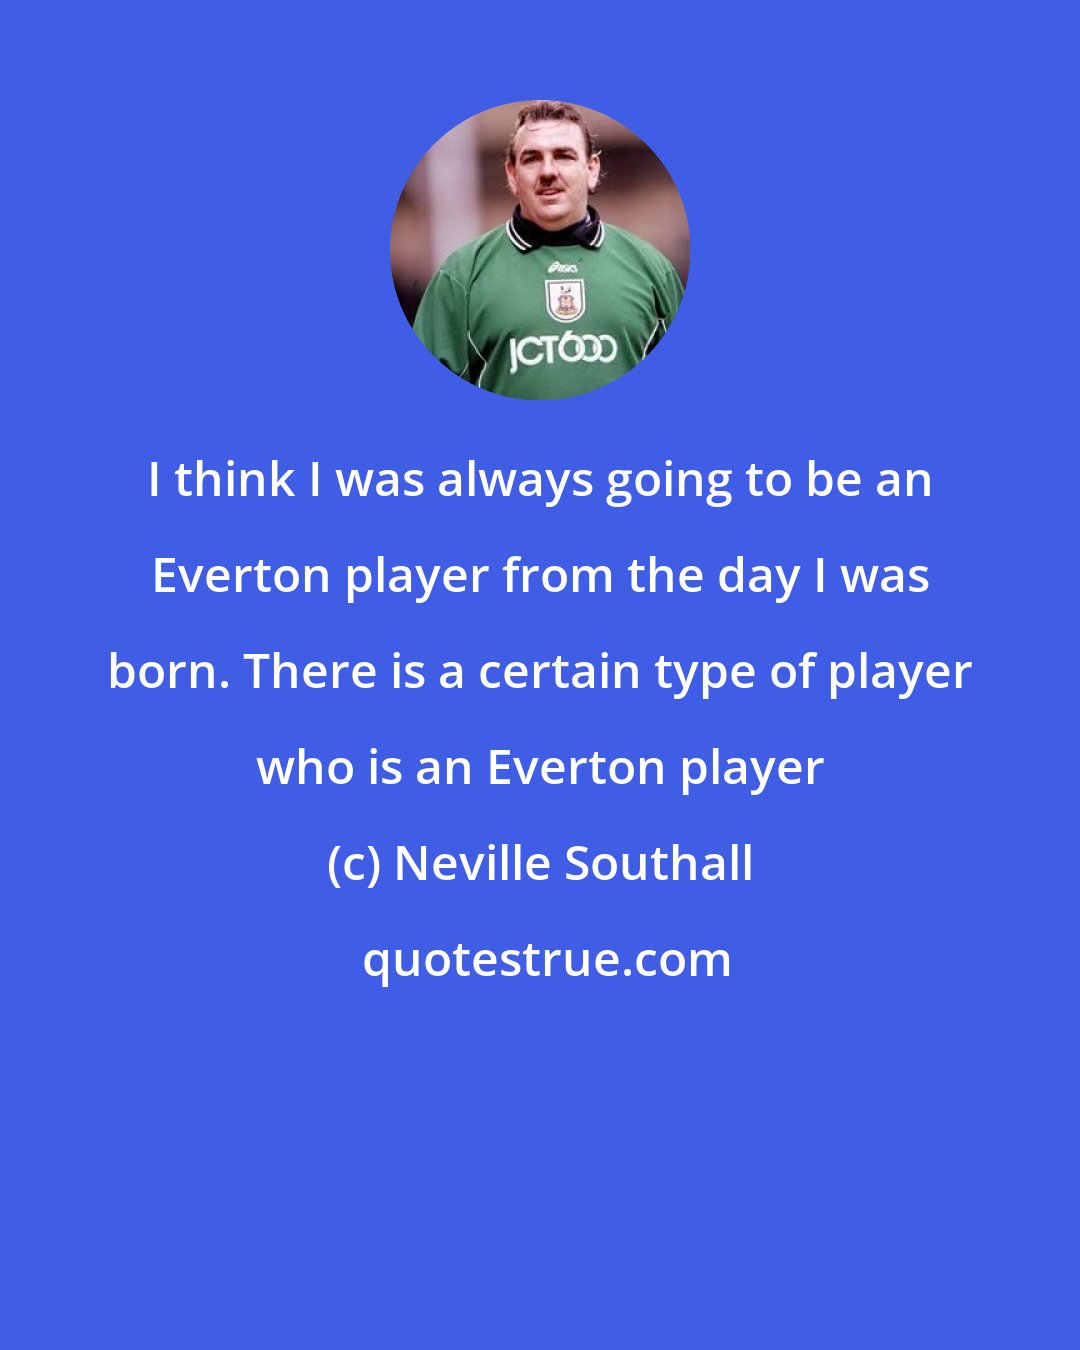 Neville Southall: I think I was always going to be an Everton player from the day I was born. There is a certain type of player who is an Everton player